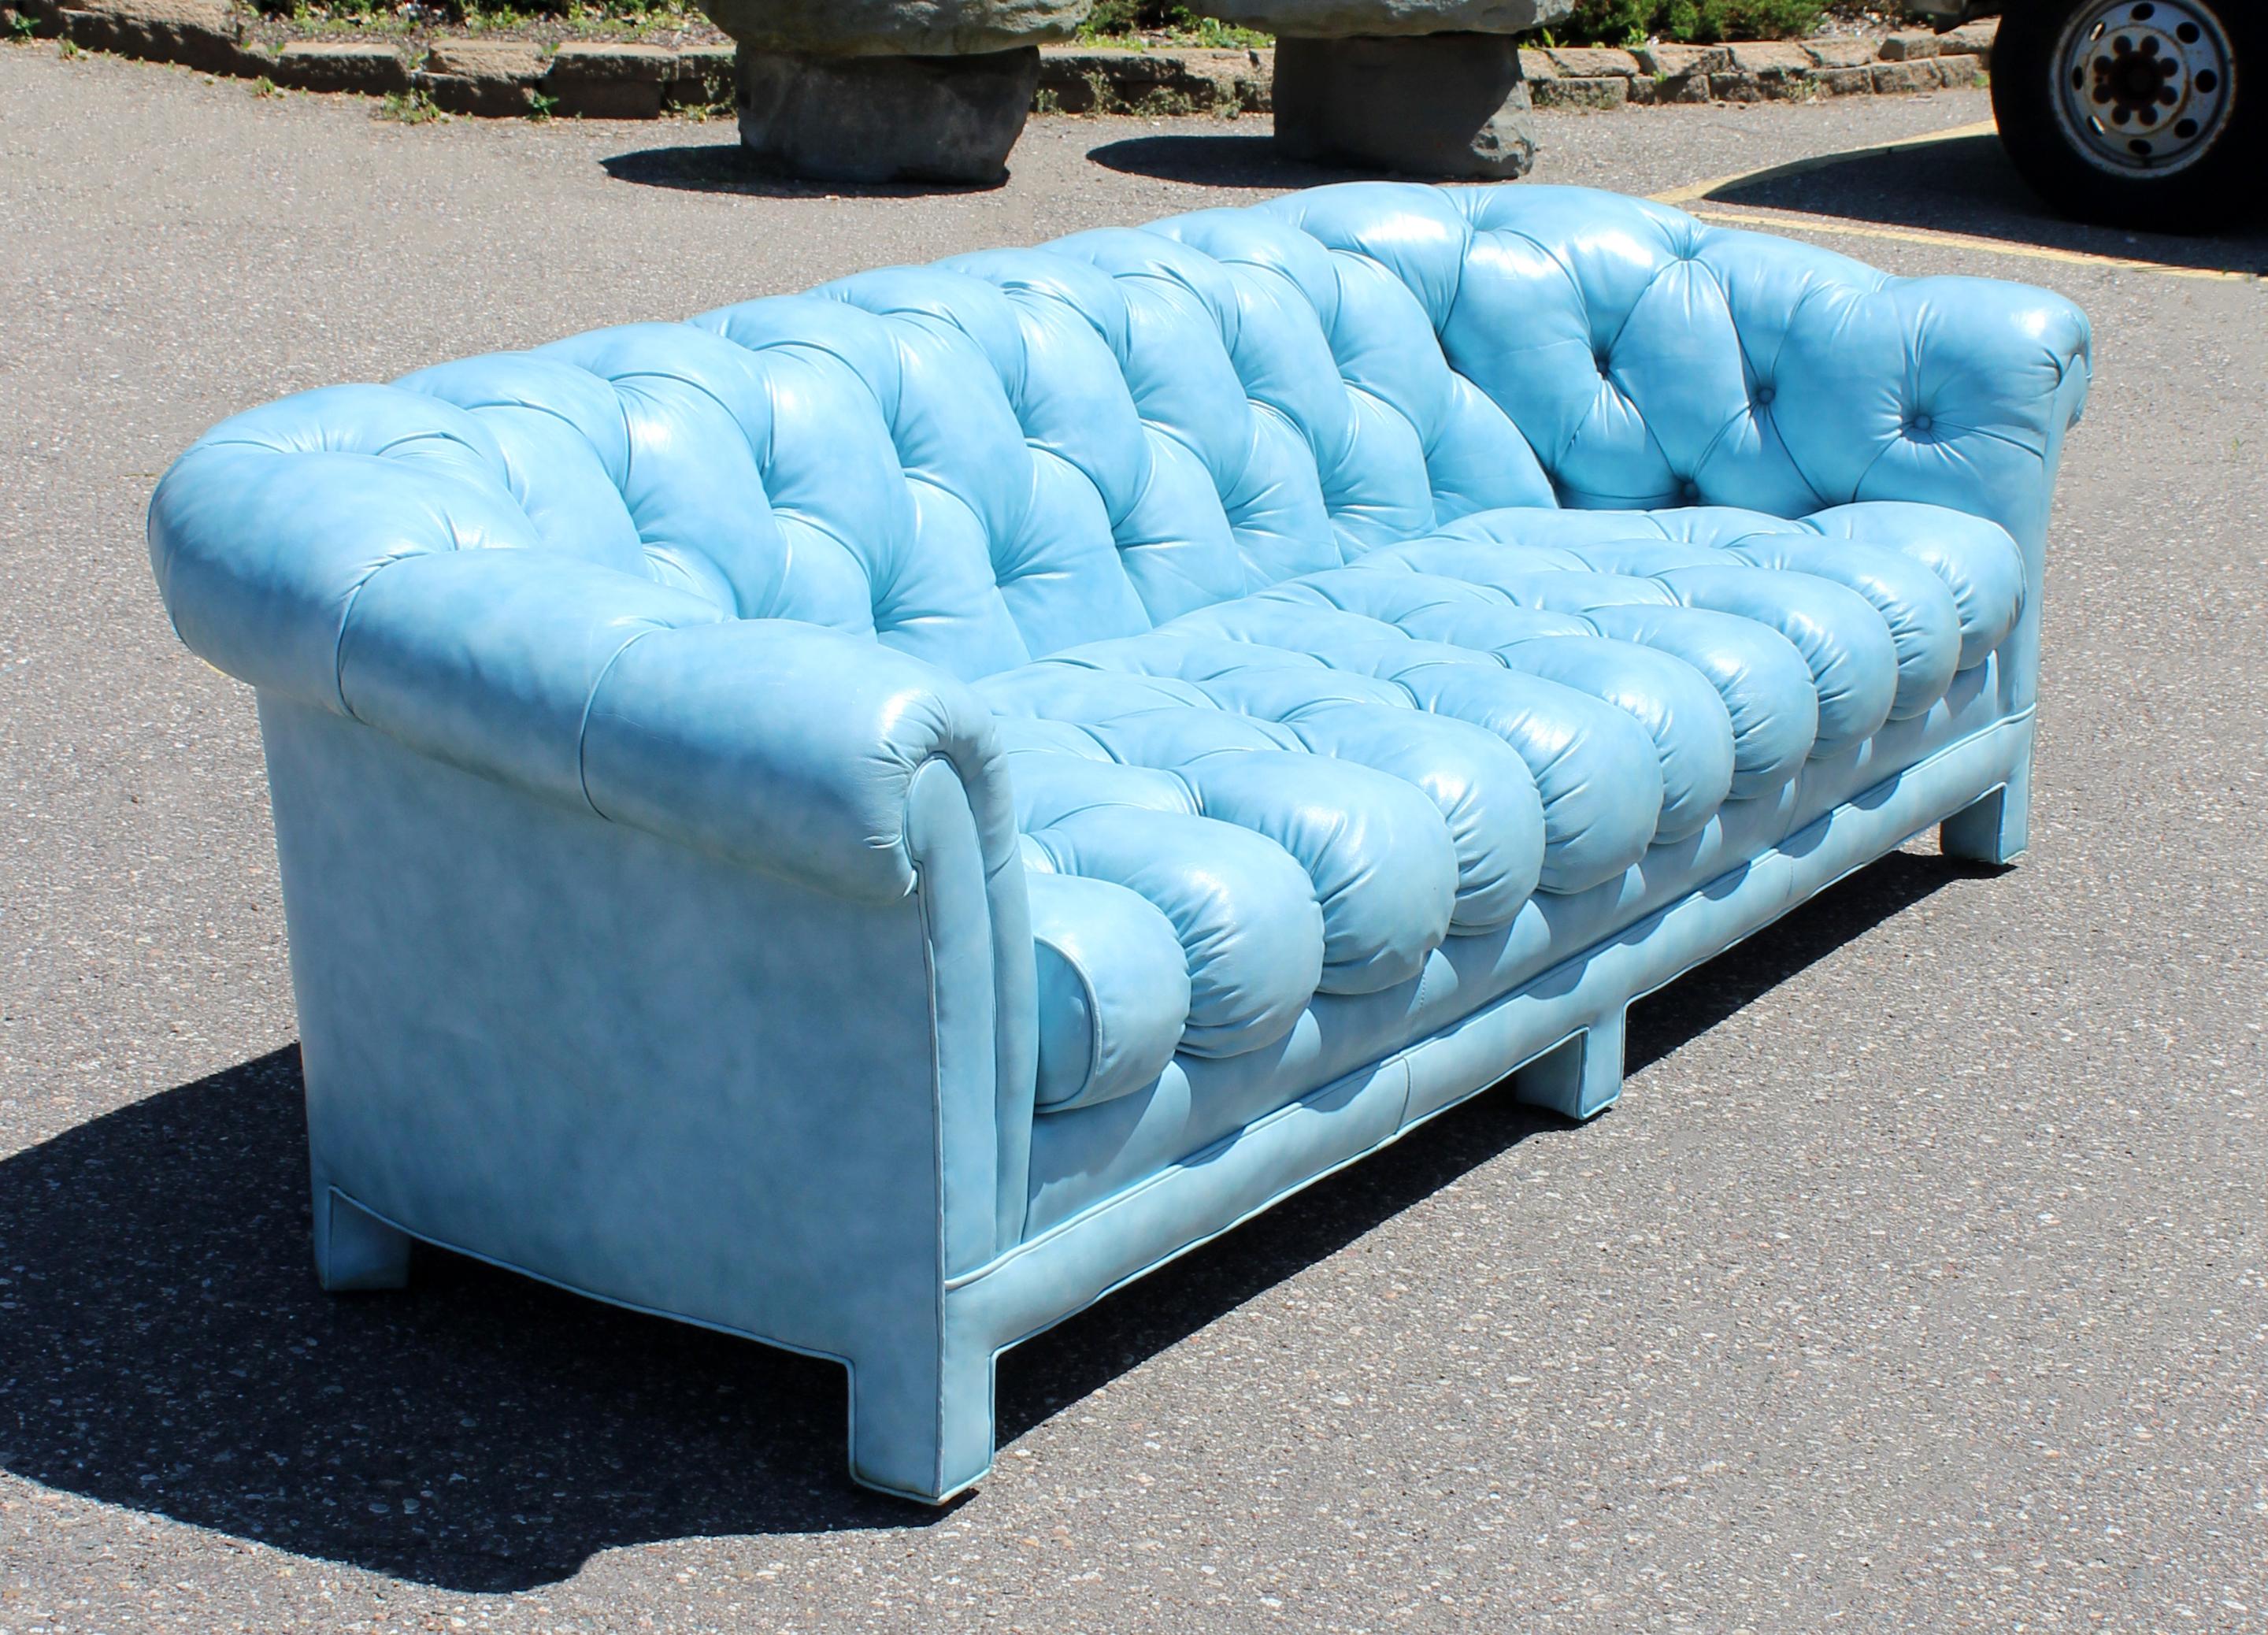 Late 20th Century Mid-Century Modern Tufted Blue Leather Chesterfield Classic Sofa, 1970s